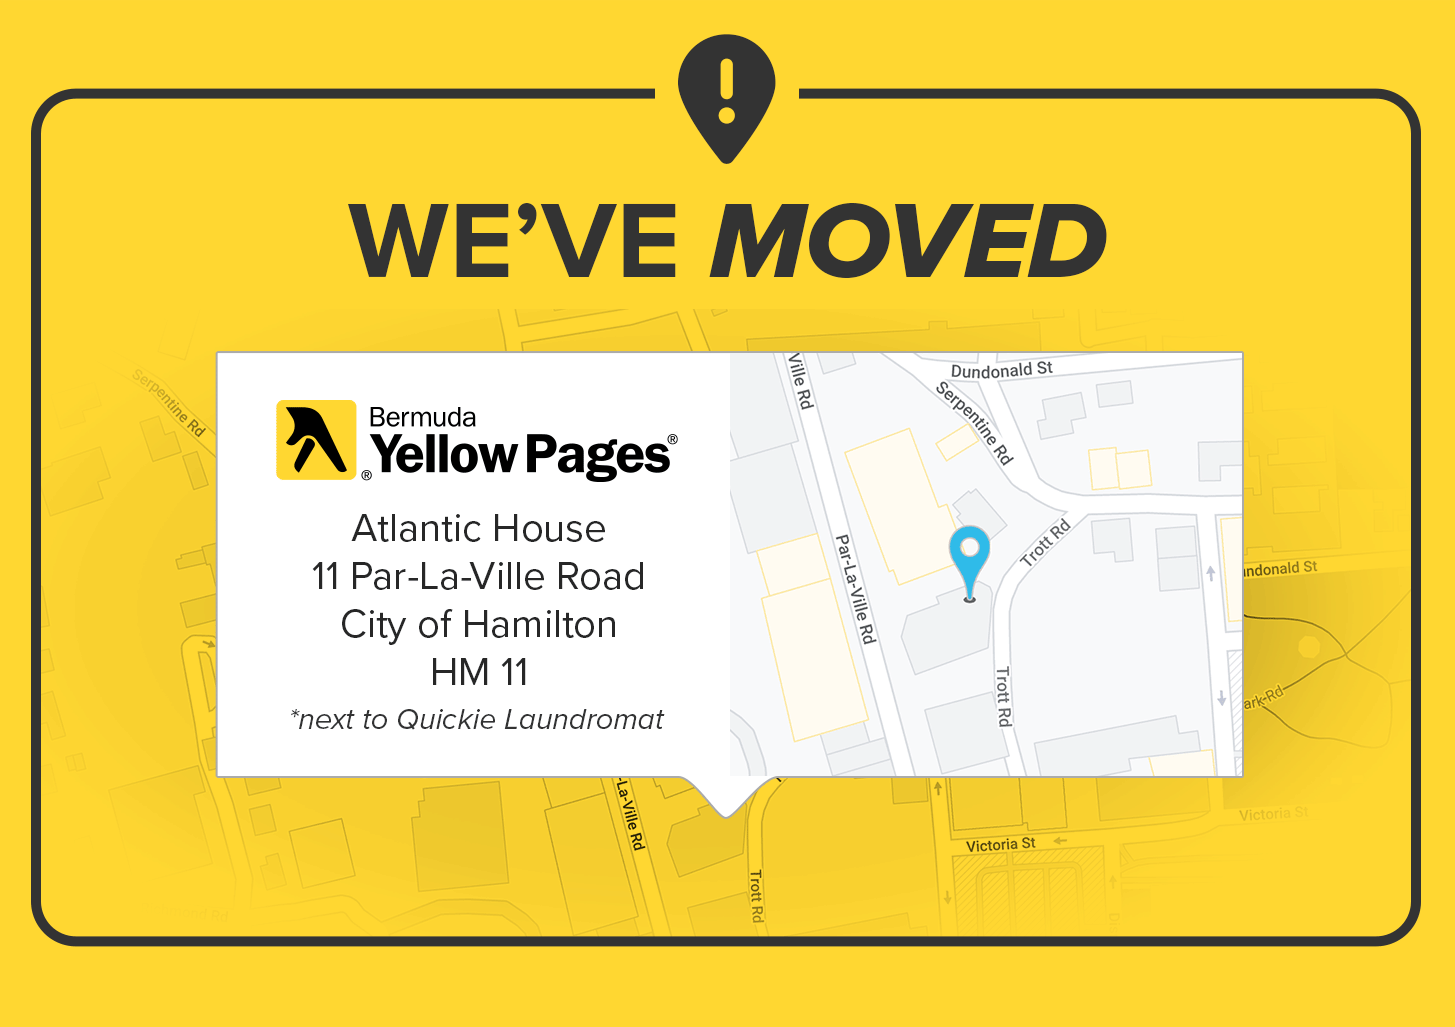 Bermuda Yellow Pages New Office Address